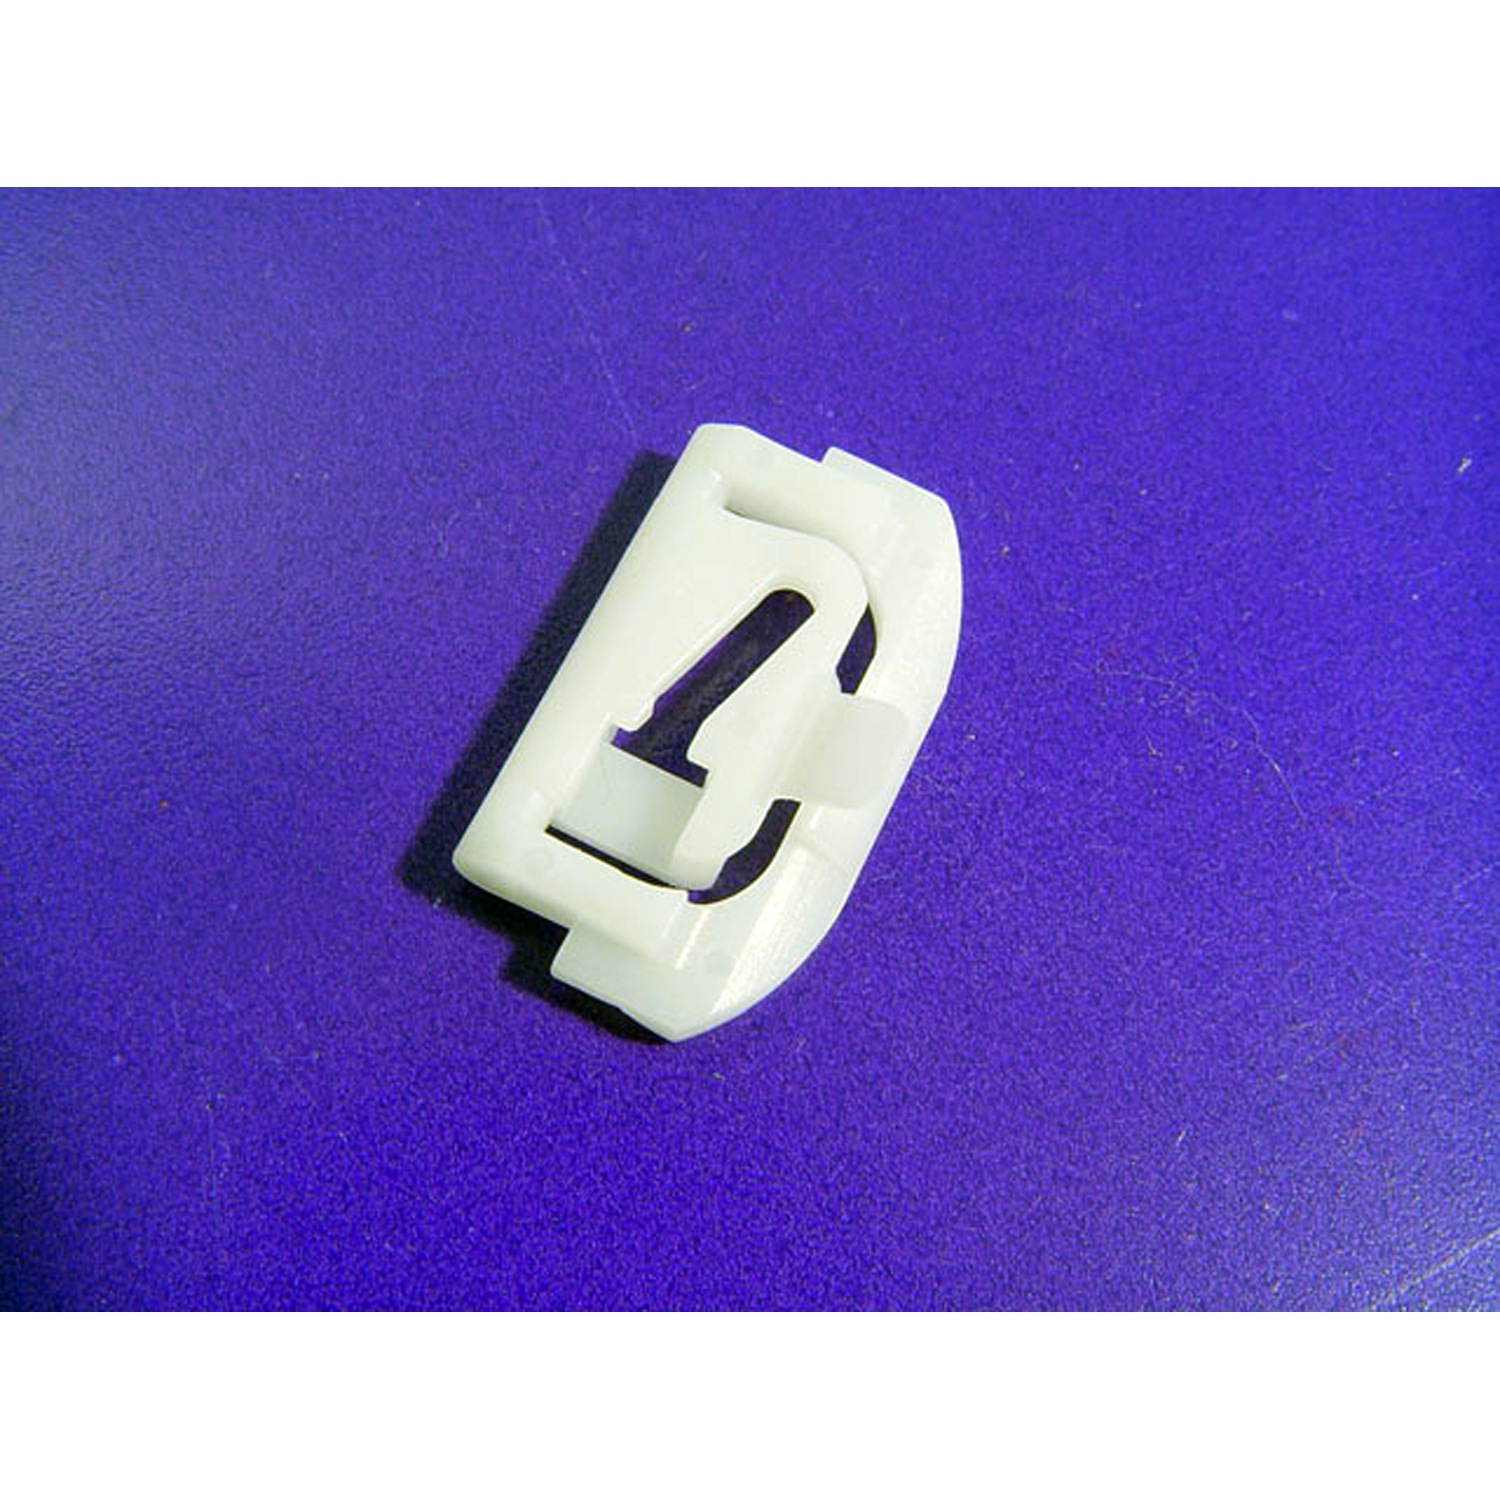 1977 Cadillac DeVille Lower Side Window Reveal Molding Clip.  Made of nylon-WF 214